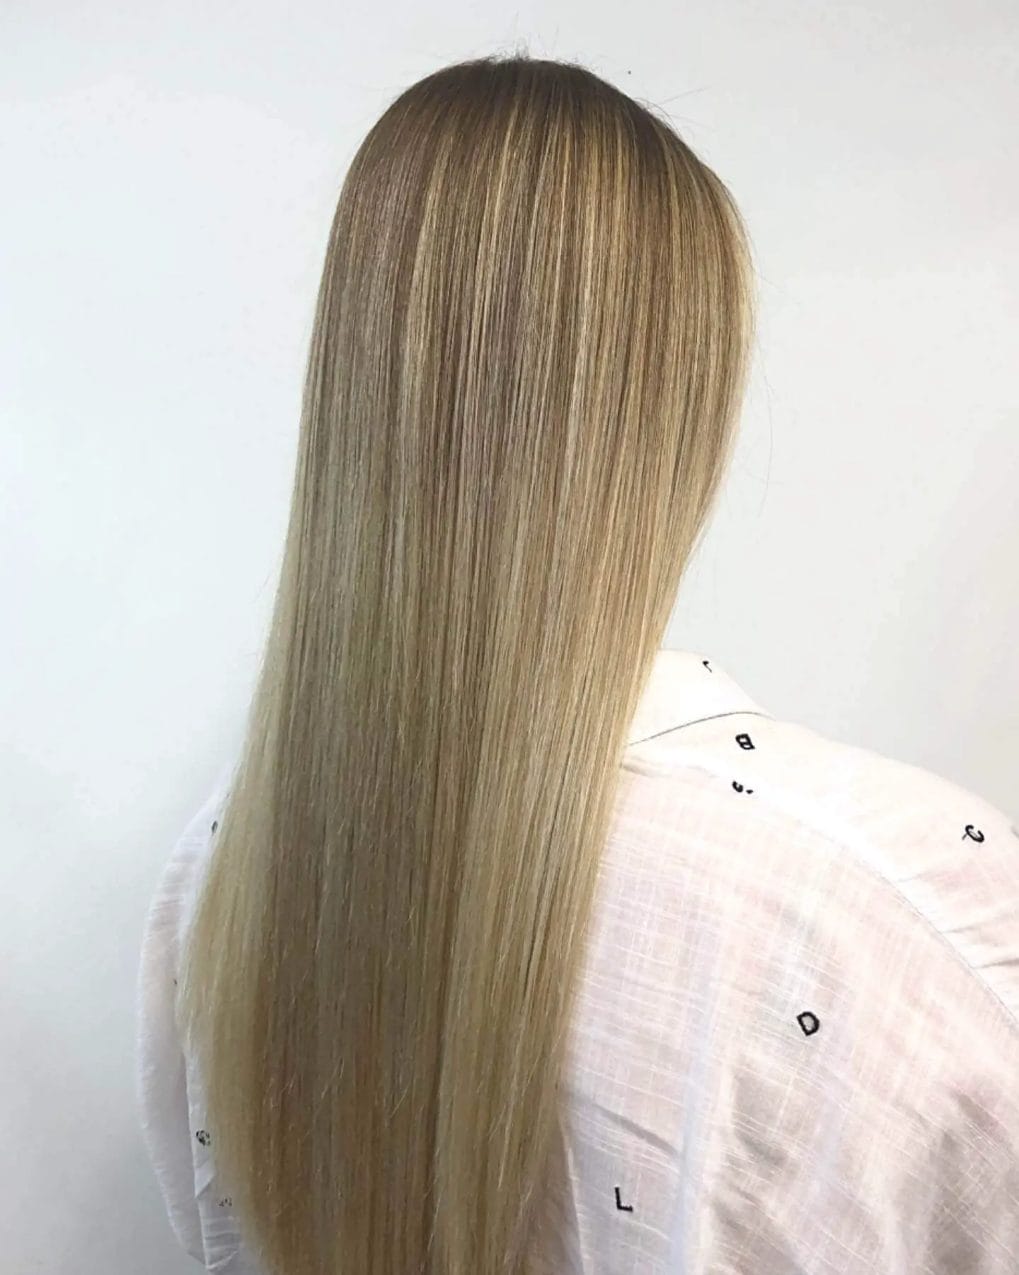 Golden blonde balayage on classic long straight hair.